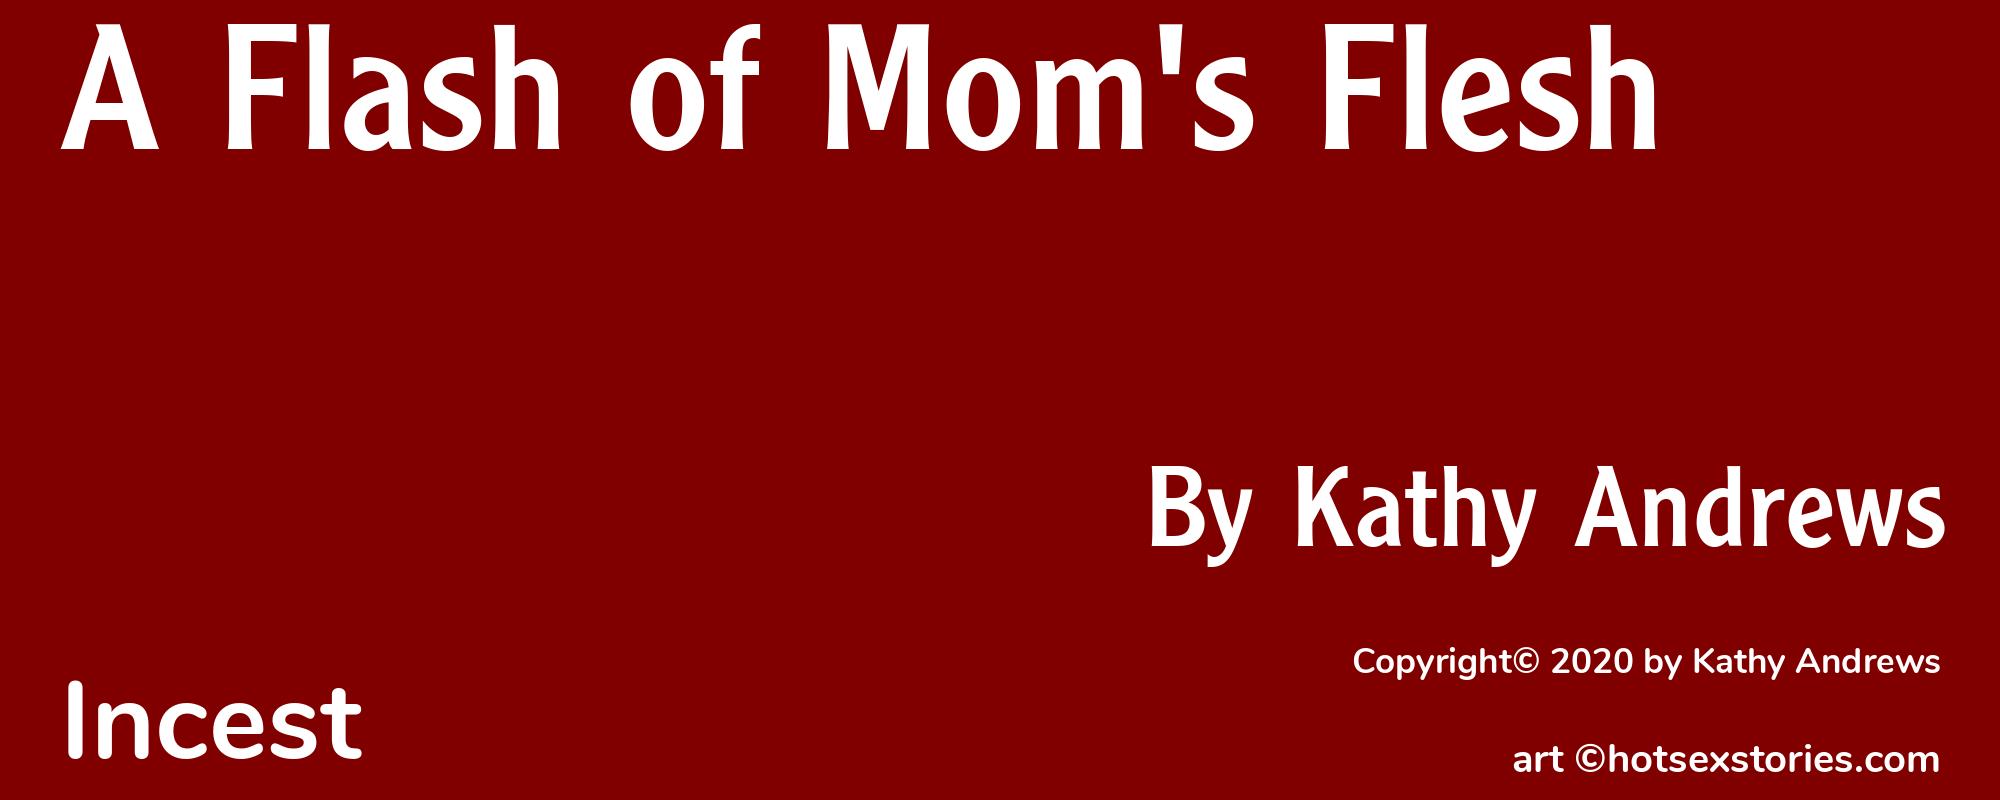 A Flash of Mom's Flesh - Cover